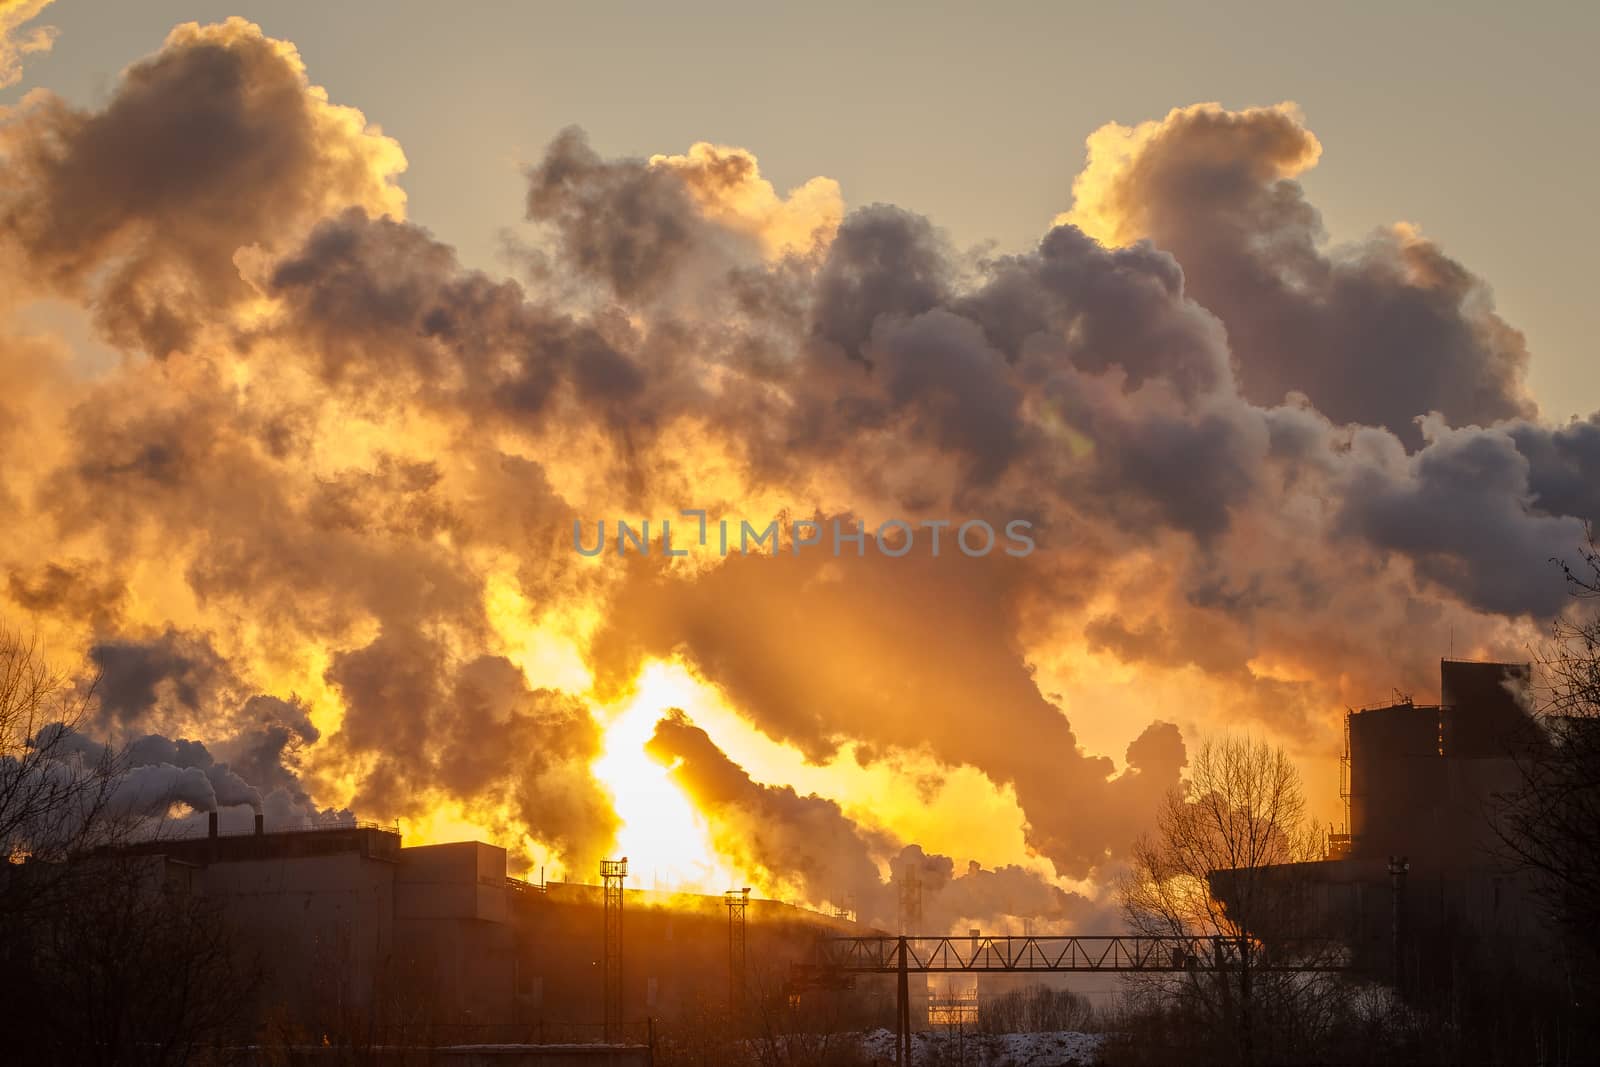 the plant with smoke and dirty air-pollution by olgagordeeva